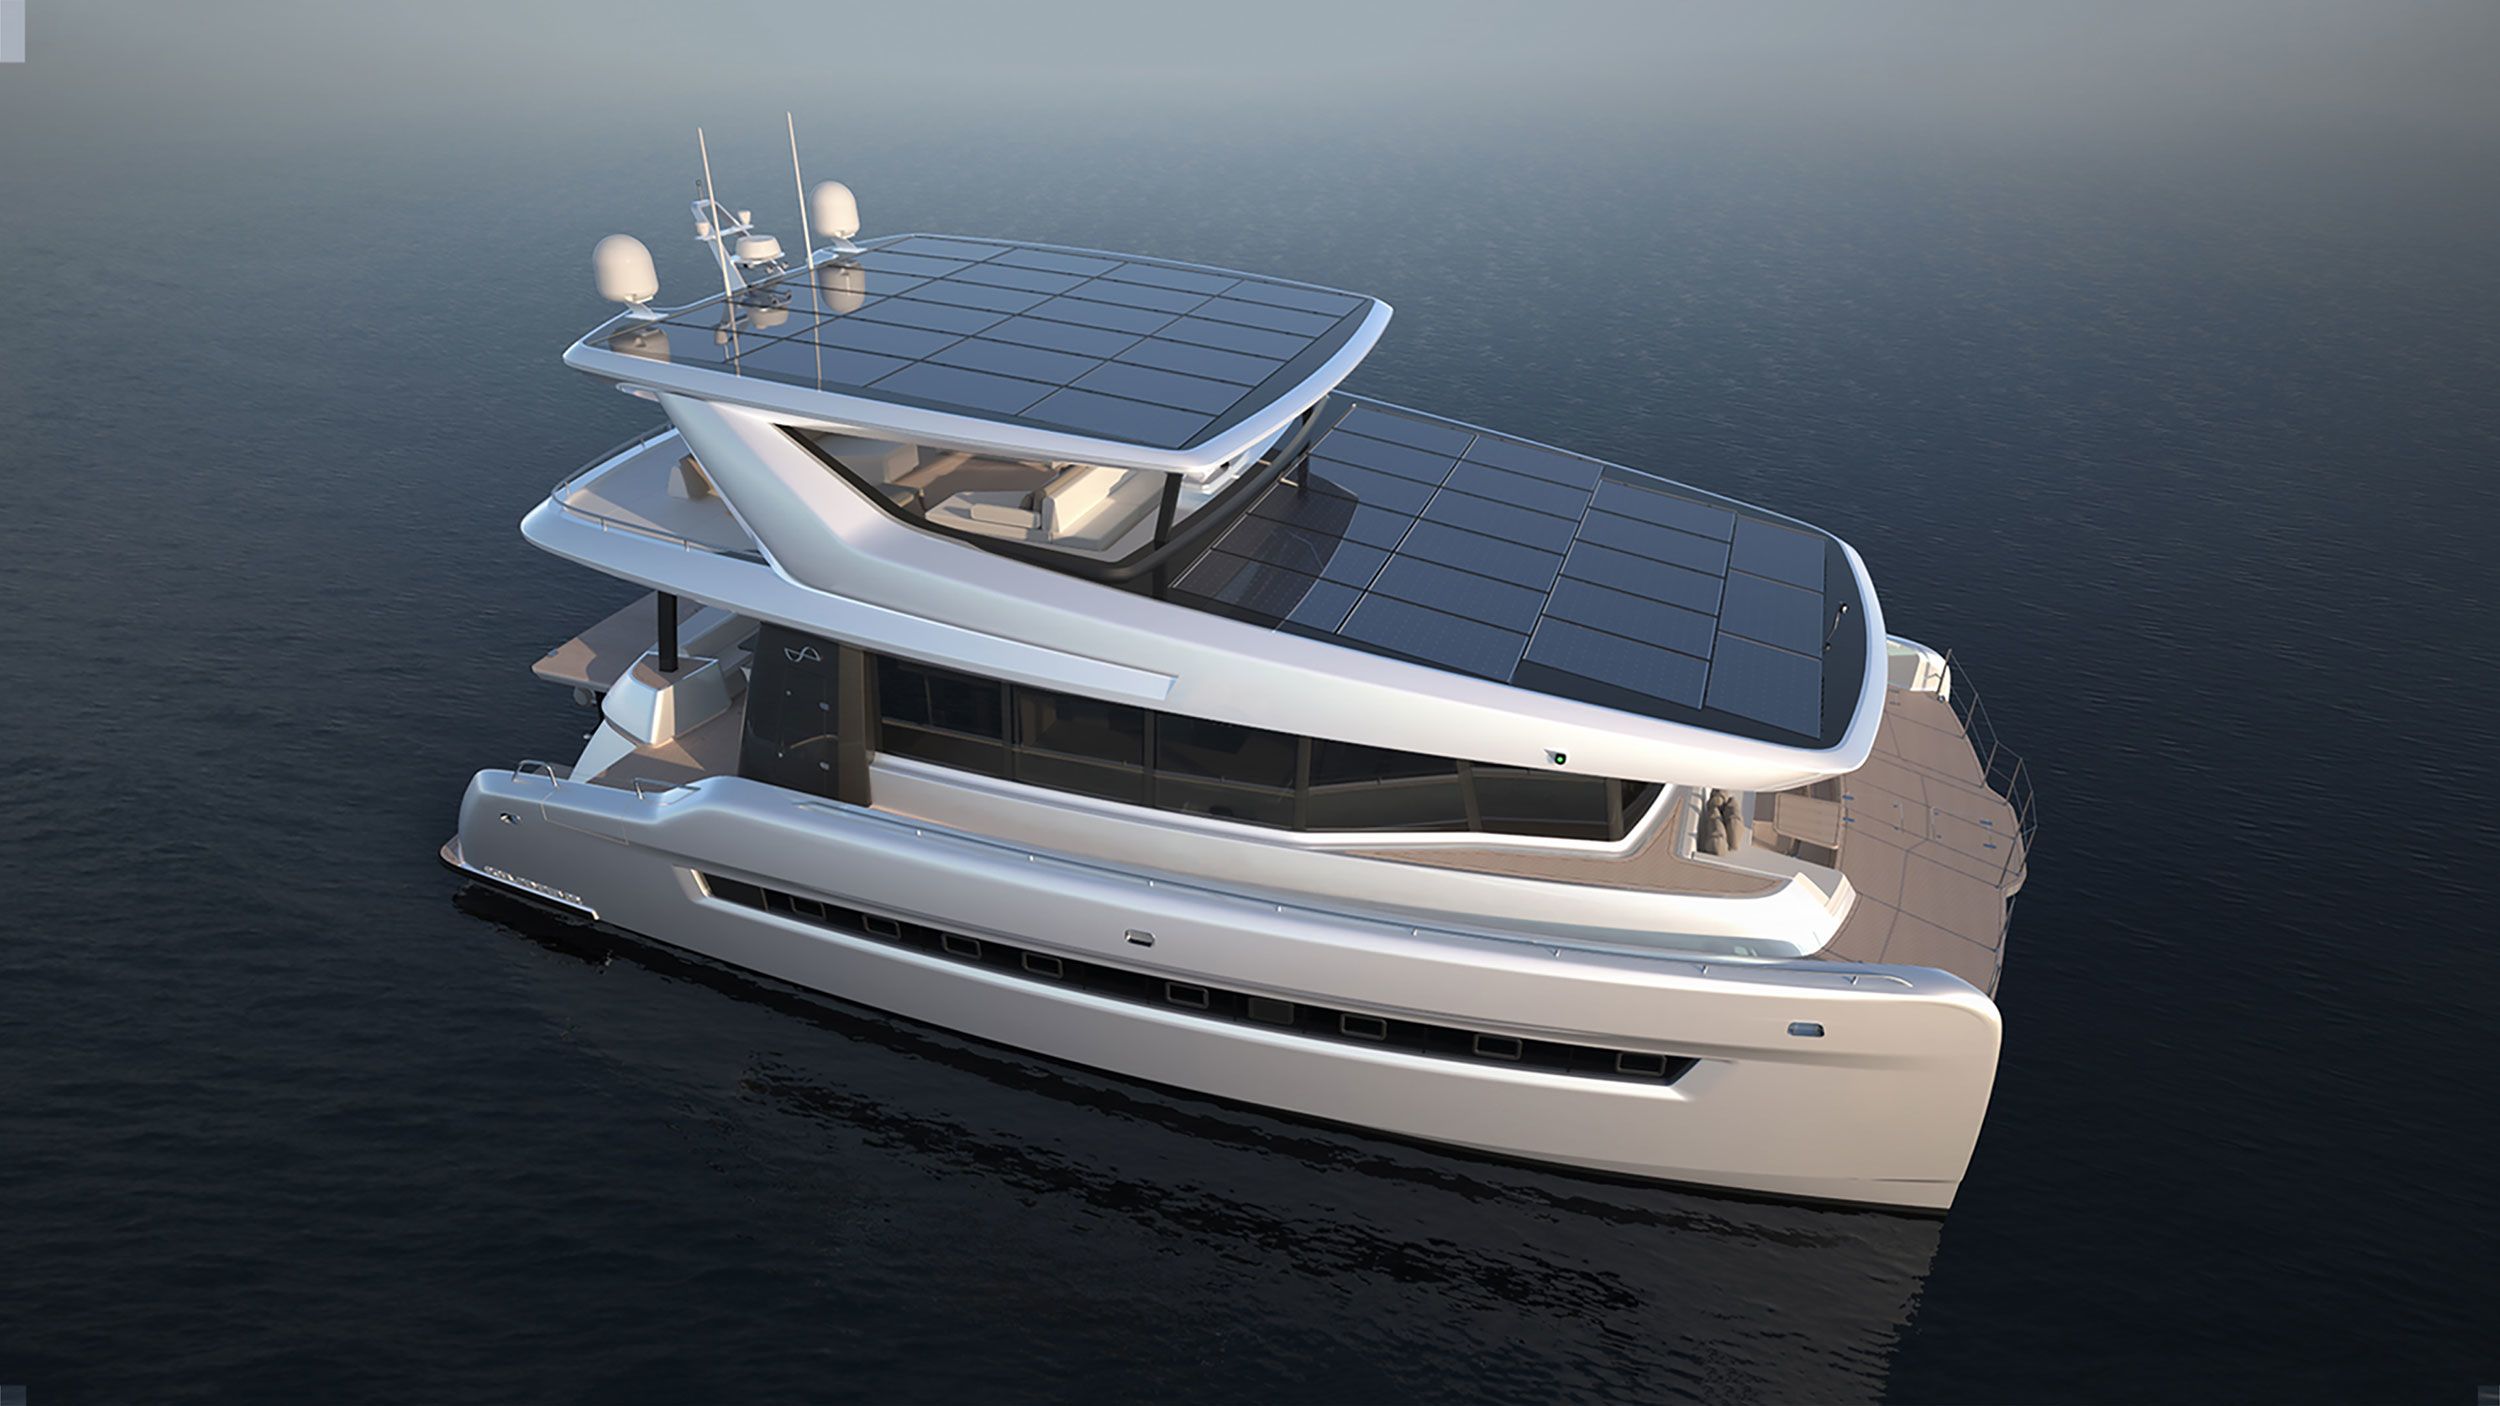 <strong>Plain sailing:</strong> It's not just road transport getting fully on board with low-impact mobility. <a href="index.php?page=&url=https%3A%2F%2Fsoelyachts.com%2F" target="_blank" target="_blank">Soel Yacht's</a> solar-powered vessels offer a greener way to travel the seas. Its latest model, Soel Senses 62, pictured in this render, has 44 solar panels fixed to the roof, generating all the power this yacht needs to cruise around the coast.